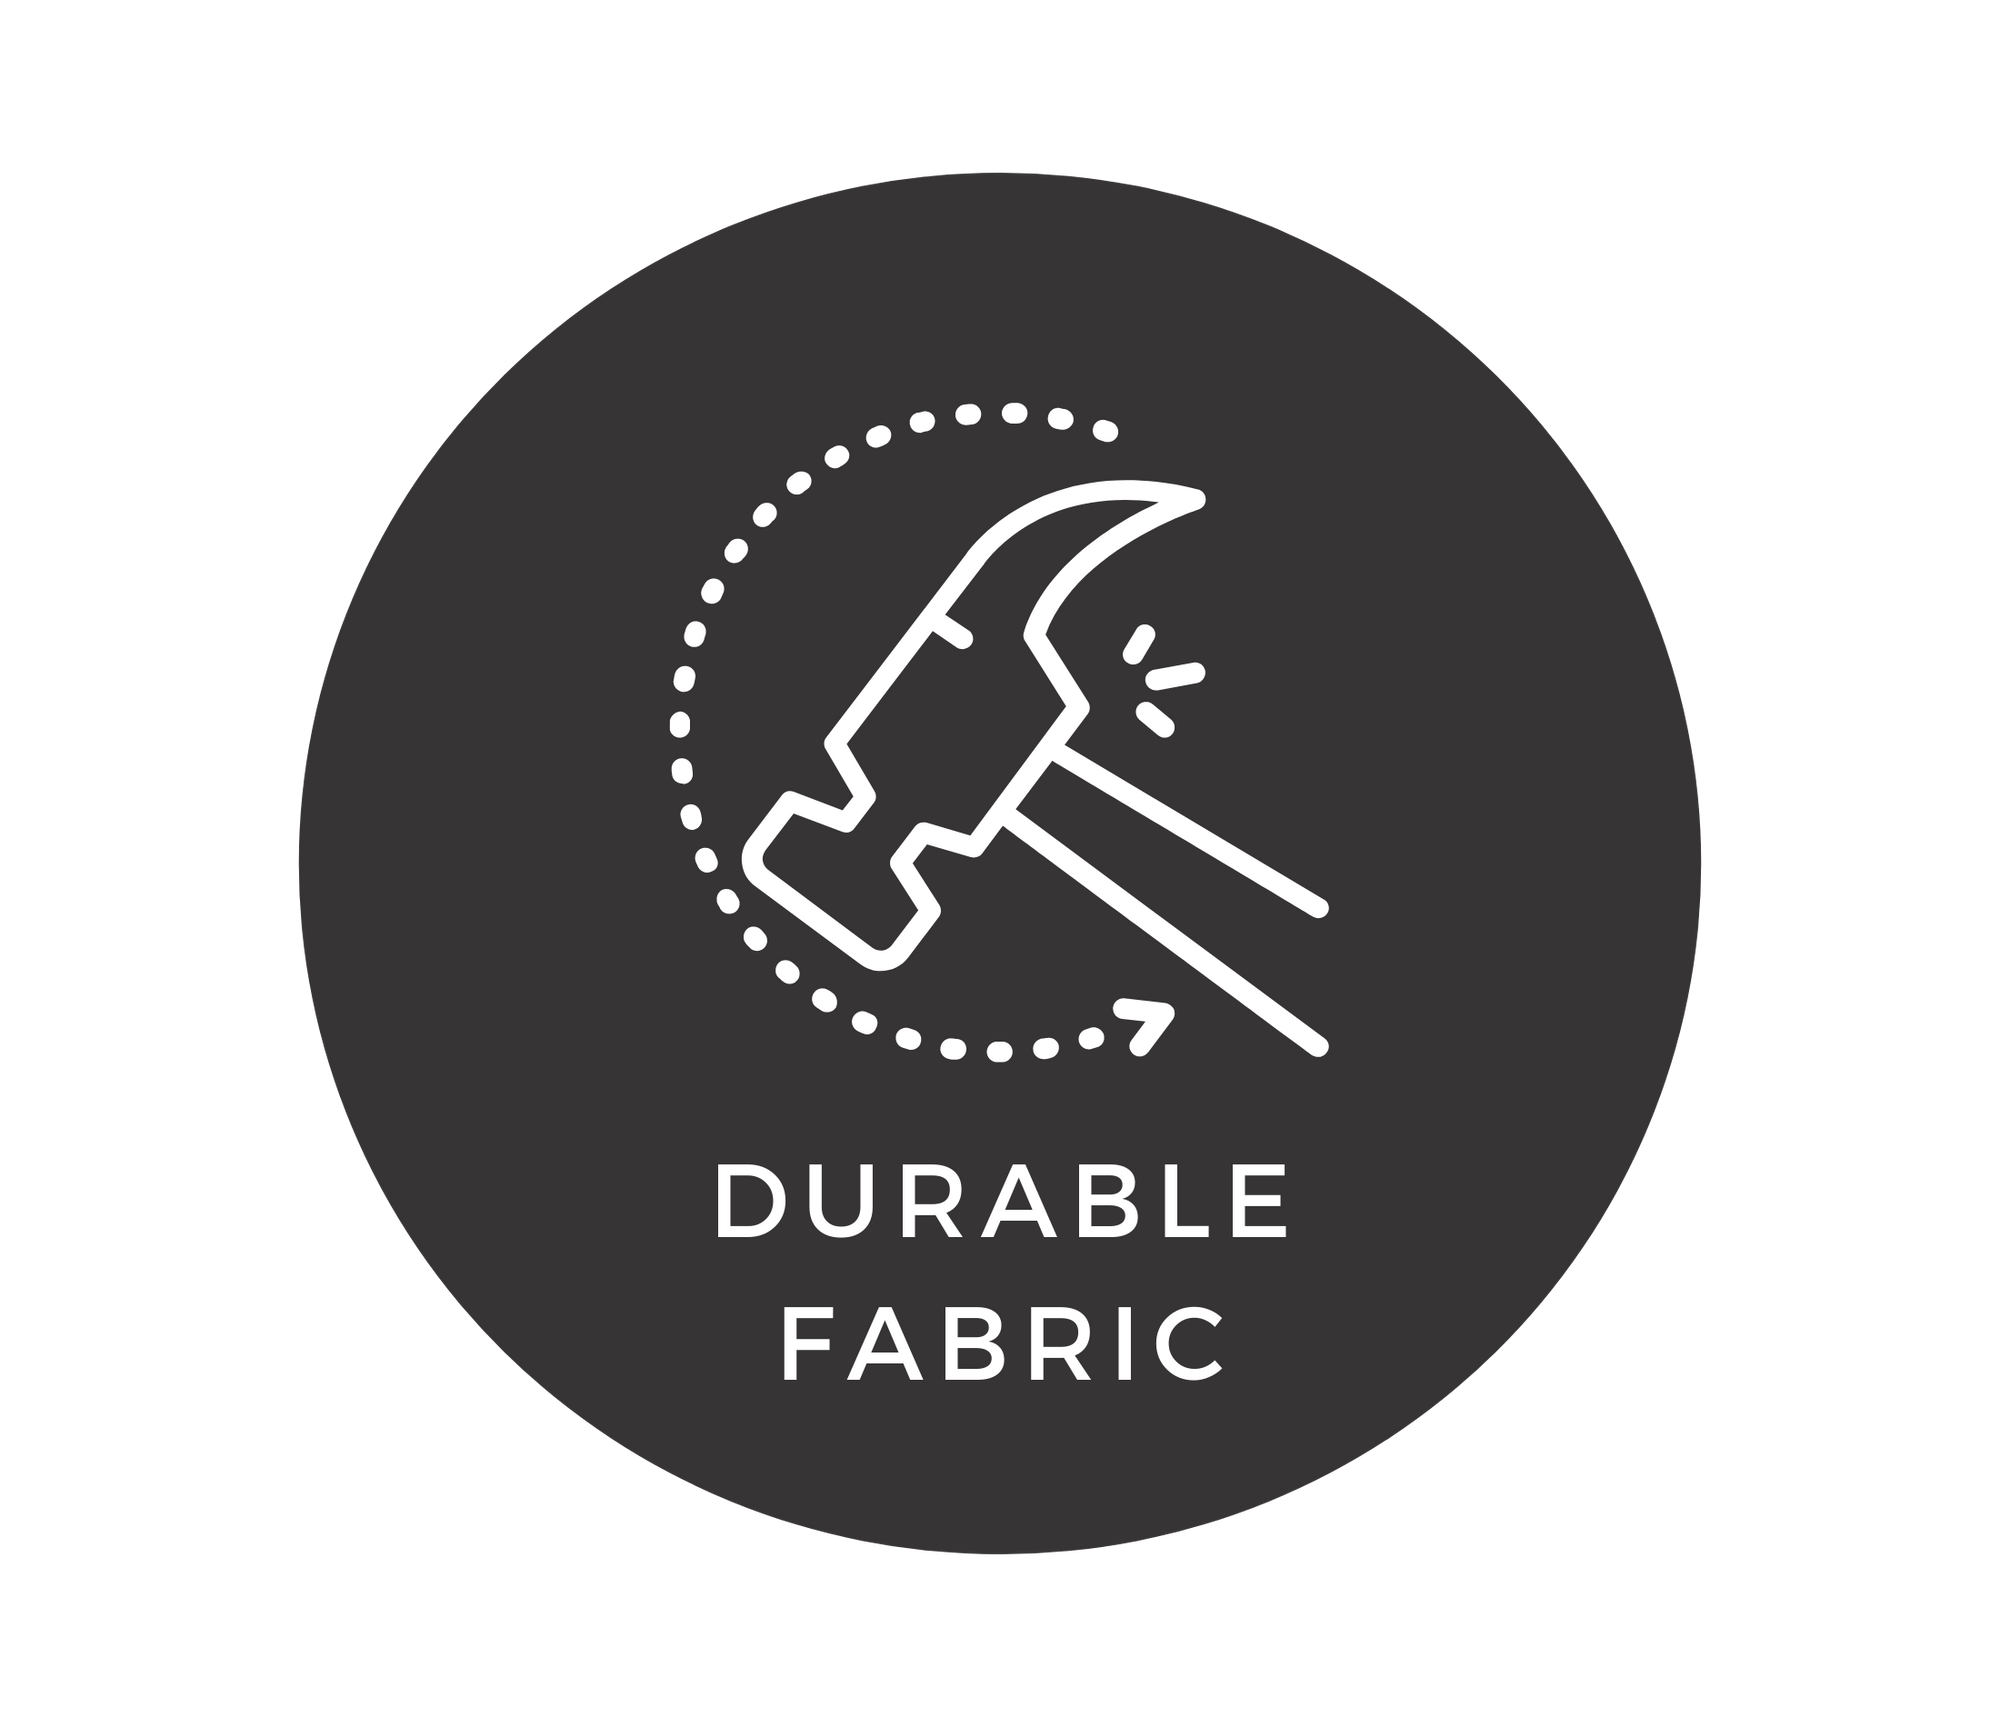 Durable fabric icon